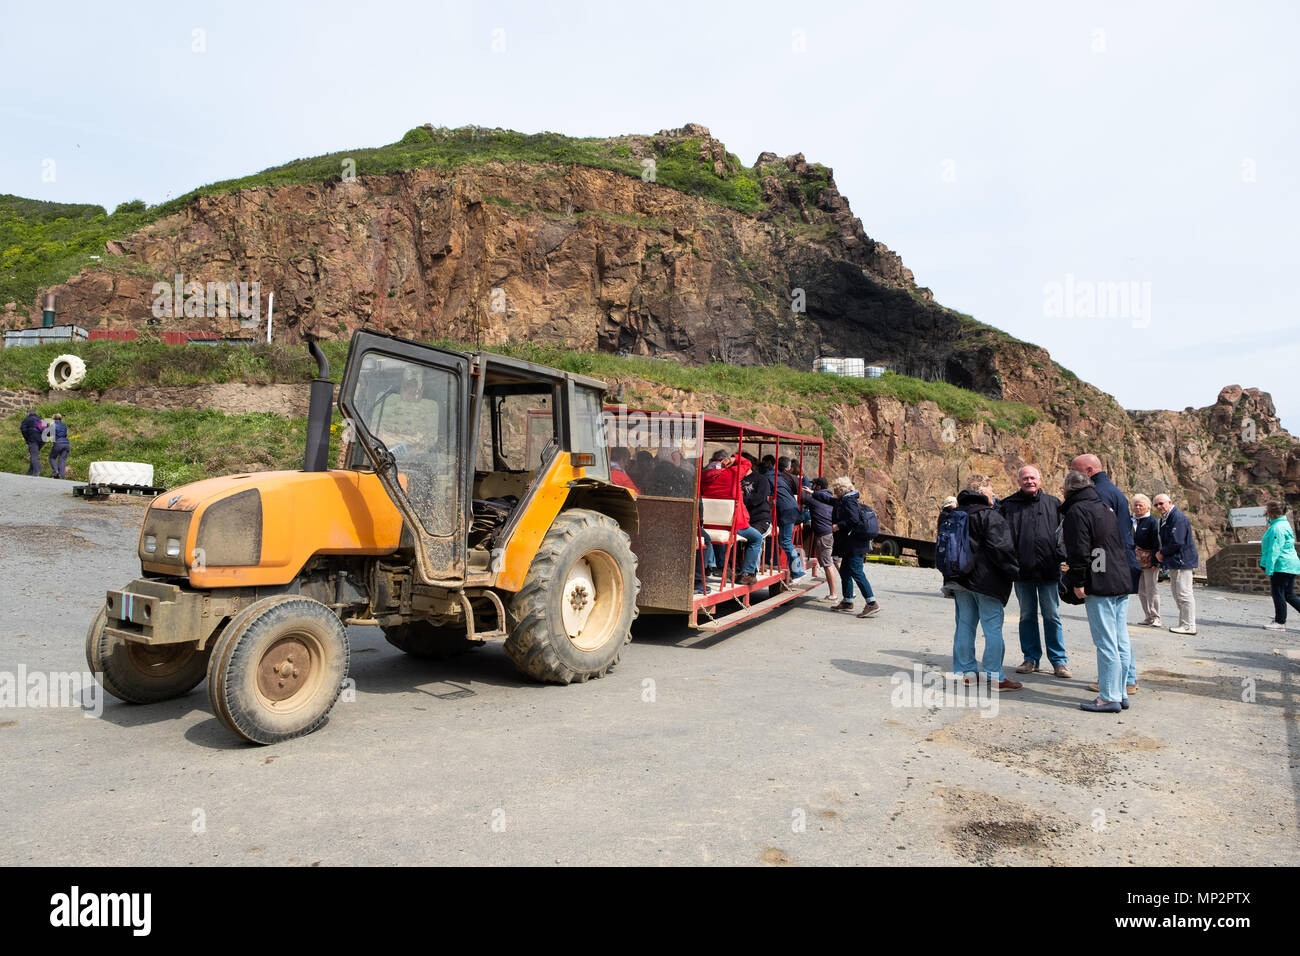 A tractor waiting to transport people from Creux Harbour to the main village on the island of Sark. Stock Photo